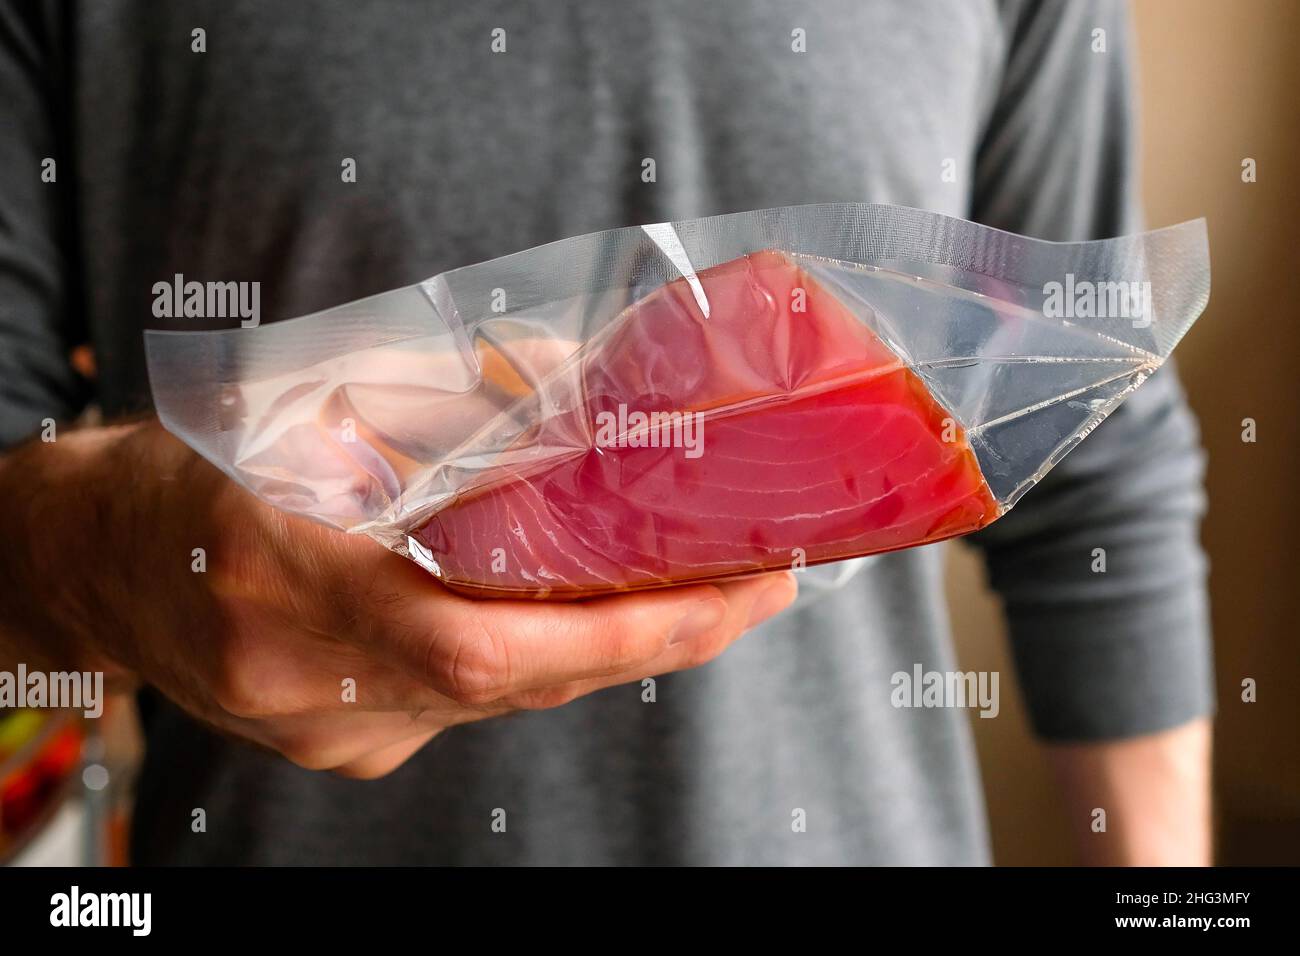 Holds a piece of tuna in a package in his hand. Stock Photo